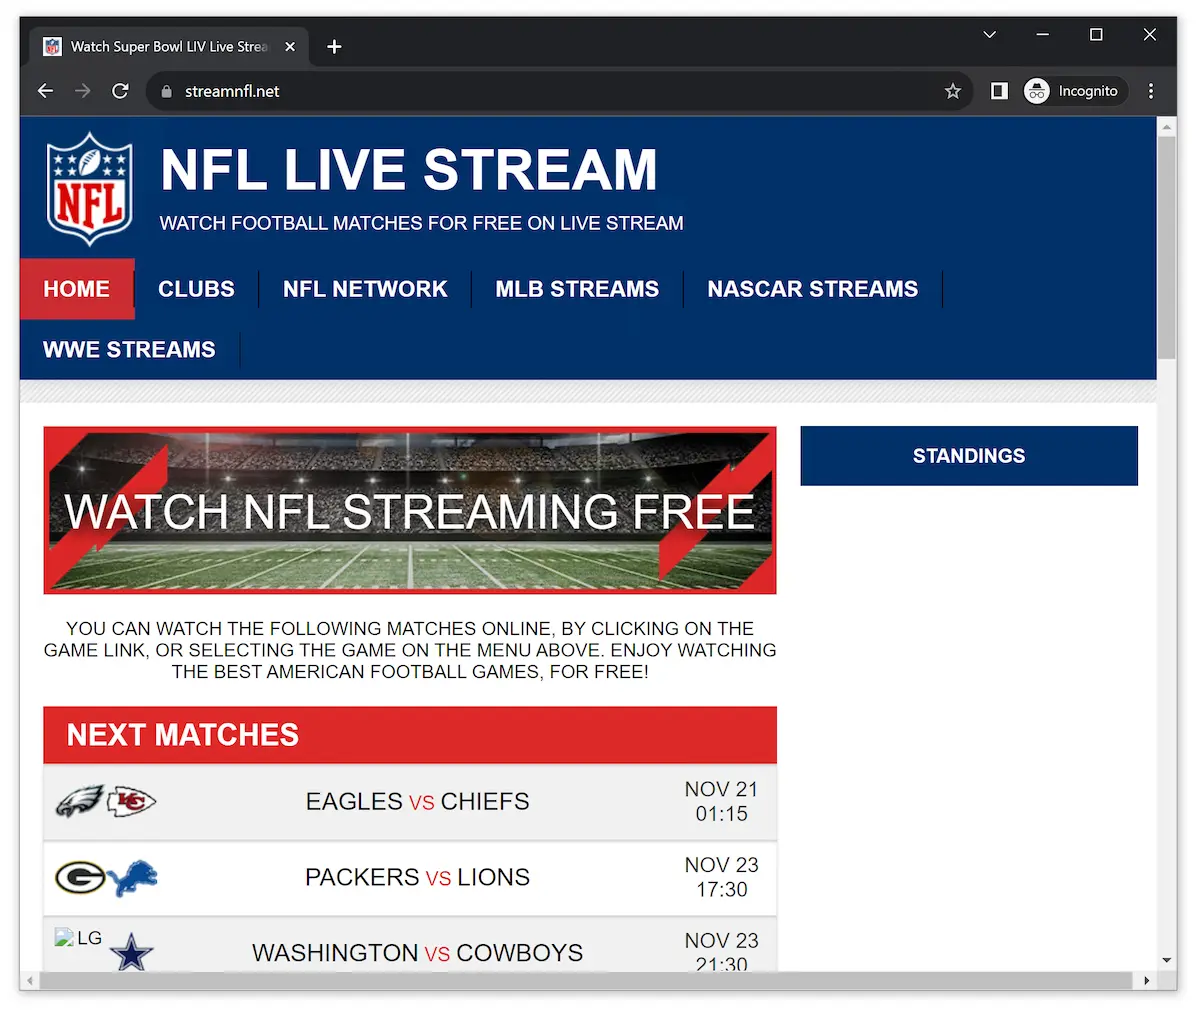 The image shows StreamNFL.net's Home Screen. The main part of the page advertises free NFL streaming and lists upcoming matches with their respective dates and times.